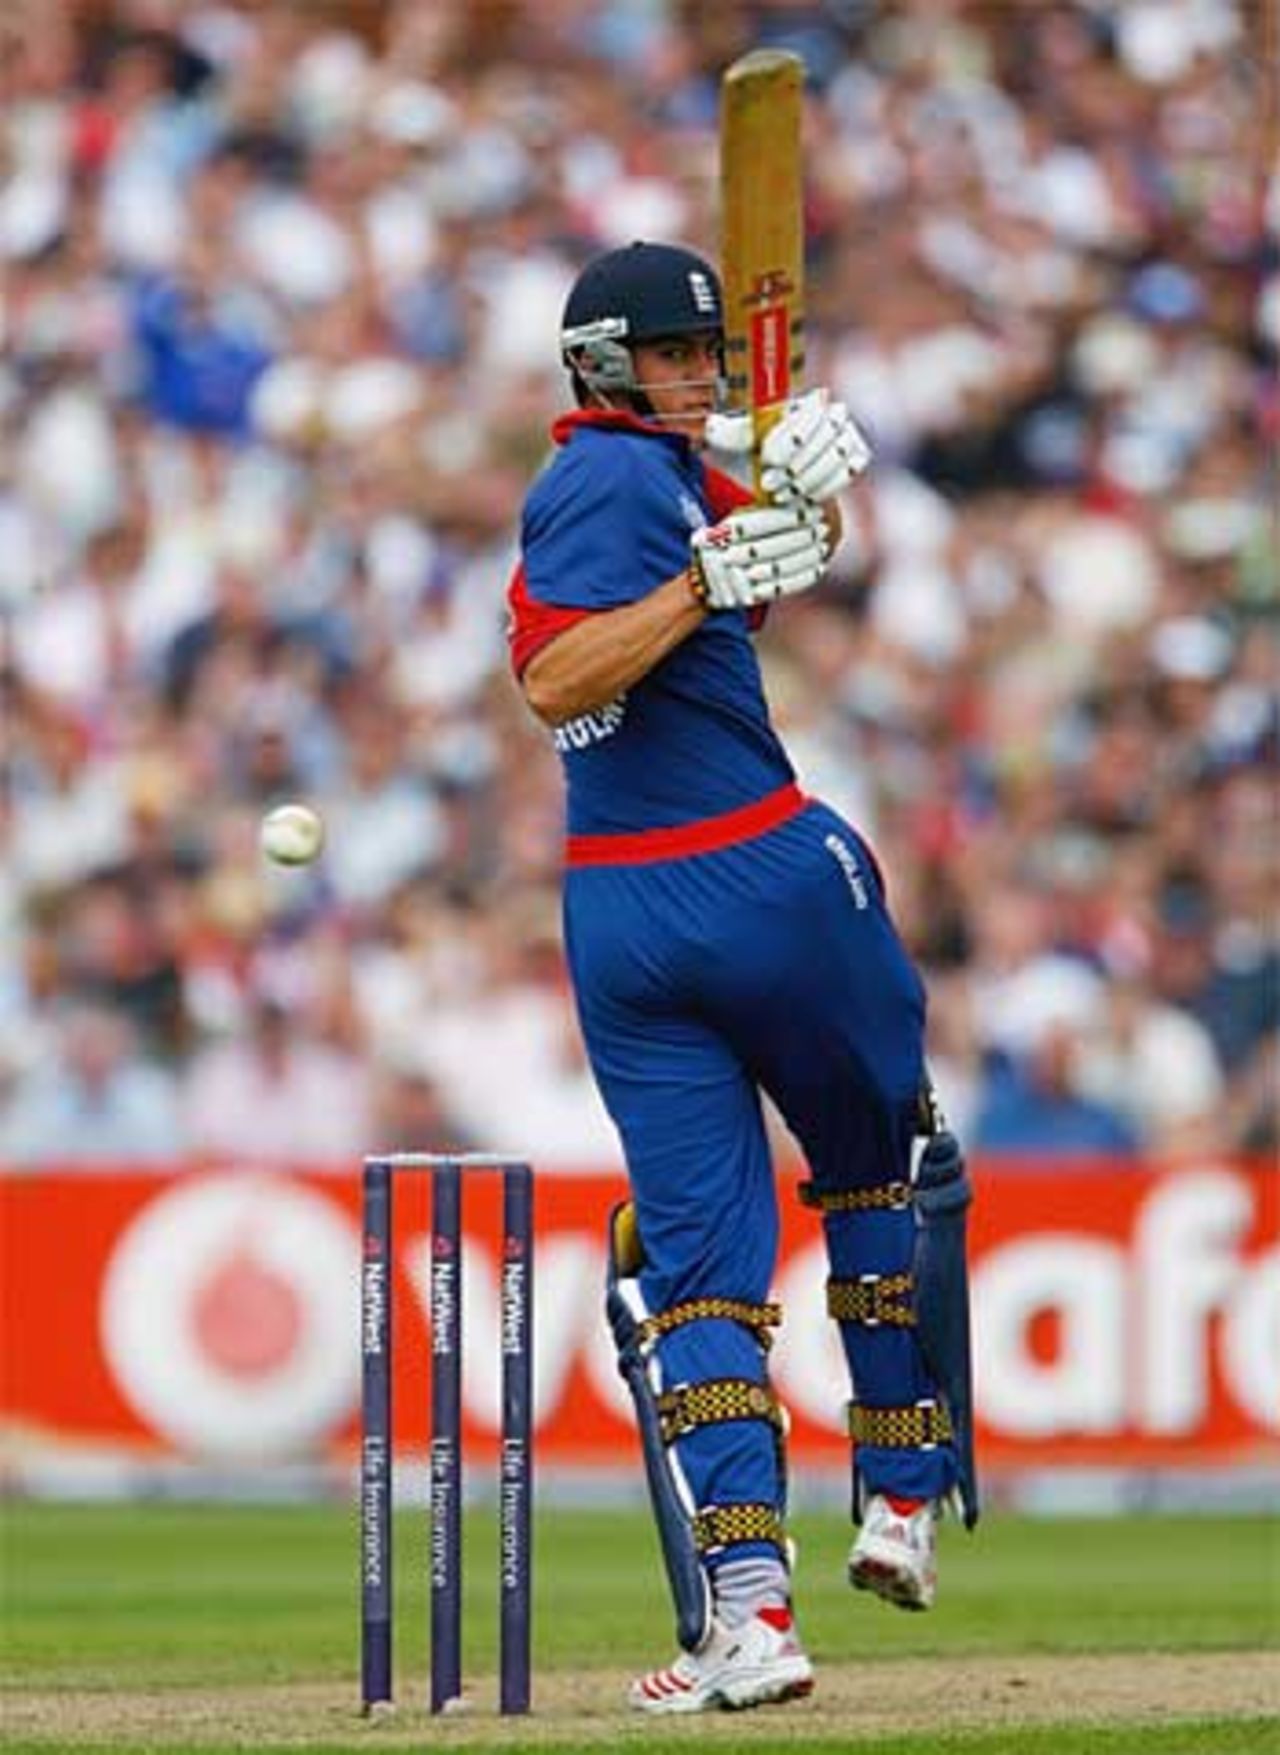 Alastair Cook made 39 on a snappy debut, but it was far from enough to help England, England v Sri Lanka, 4th ODI, Old Trafford, June 28, 2006